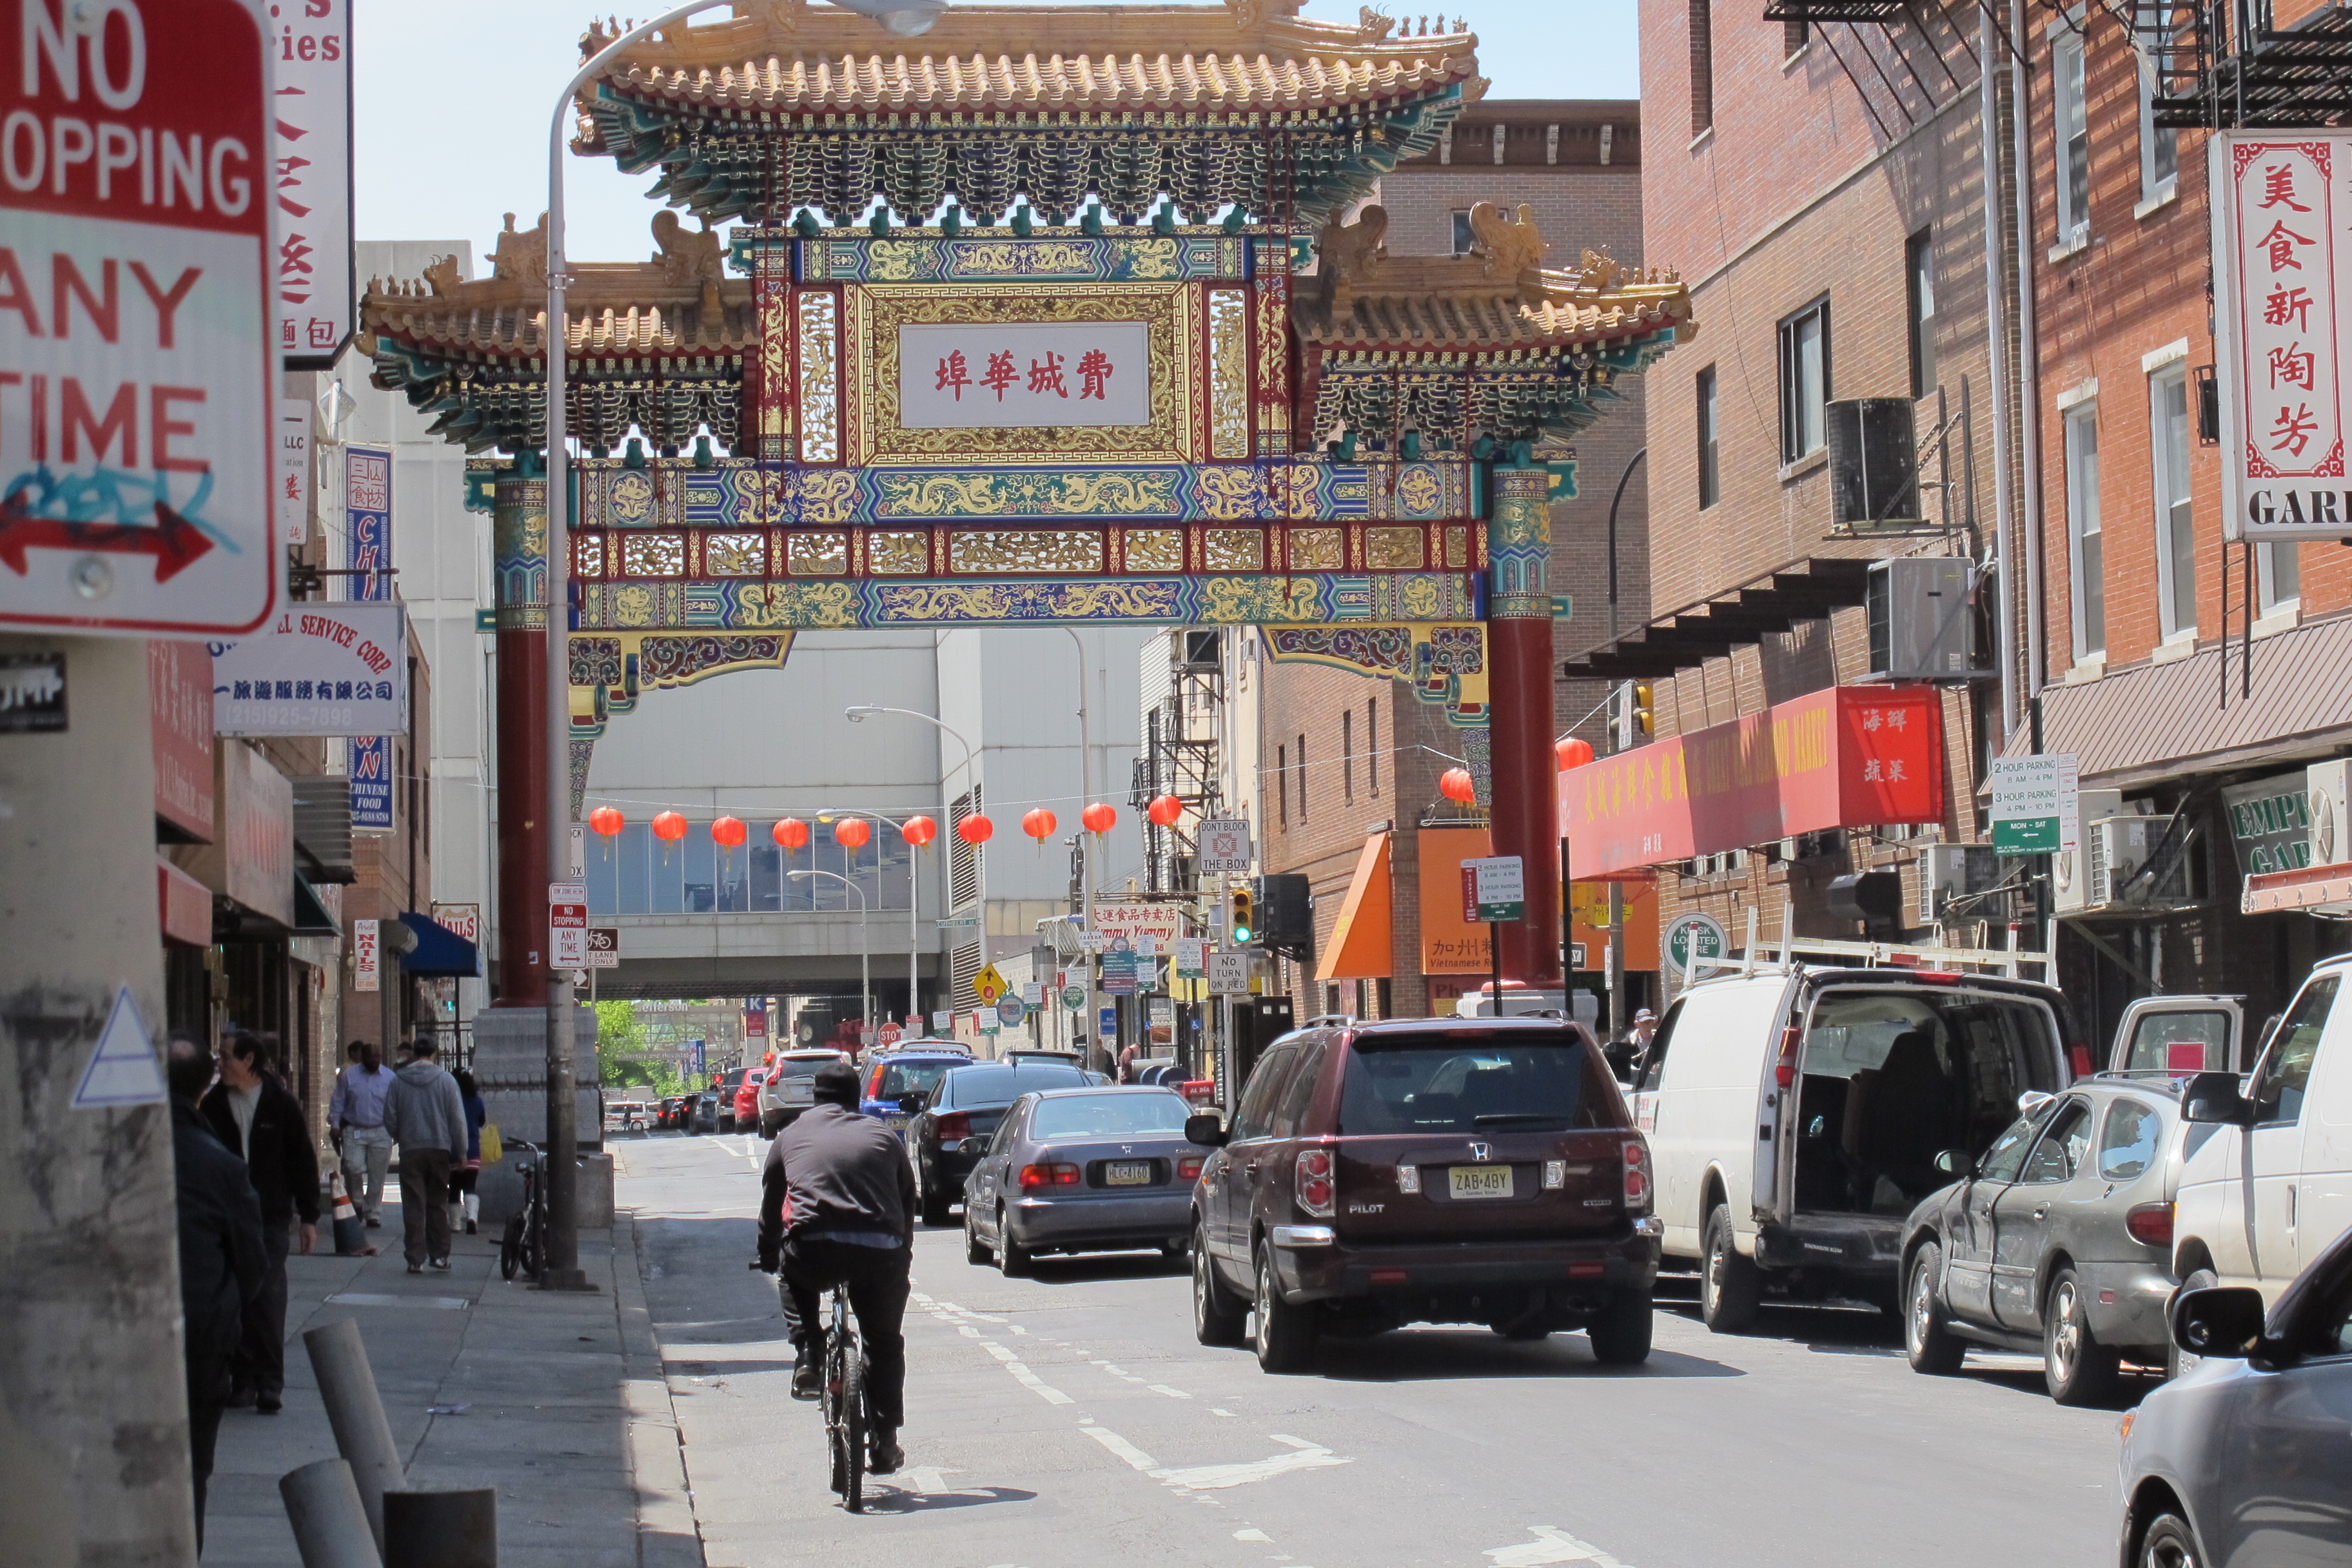 Testing out a bike lane pilot project on 10th Street in Chinatown.